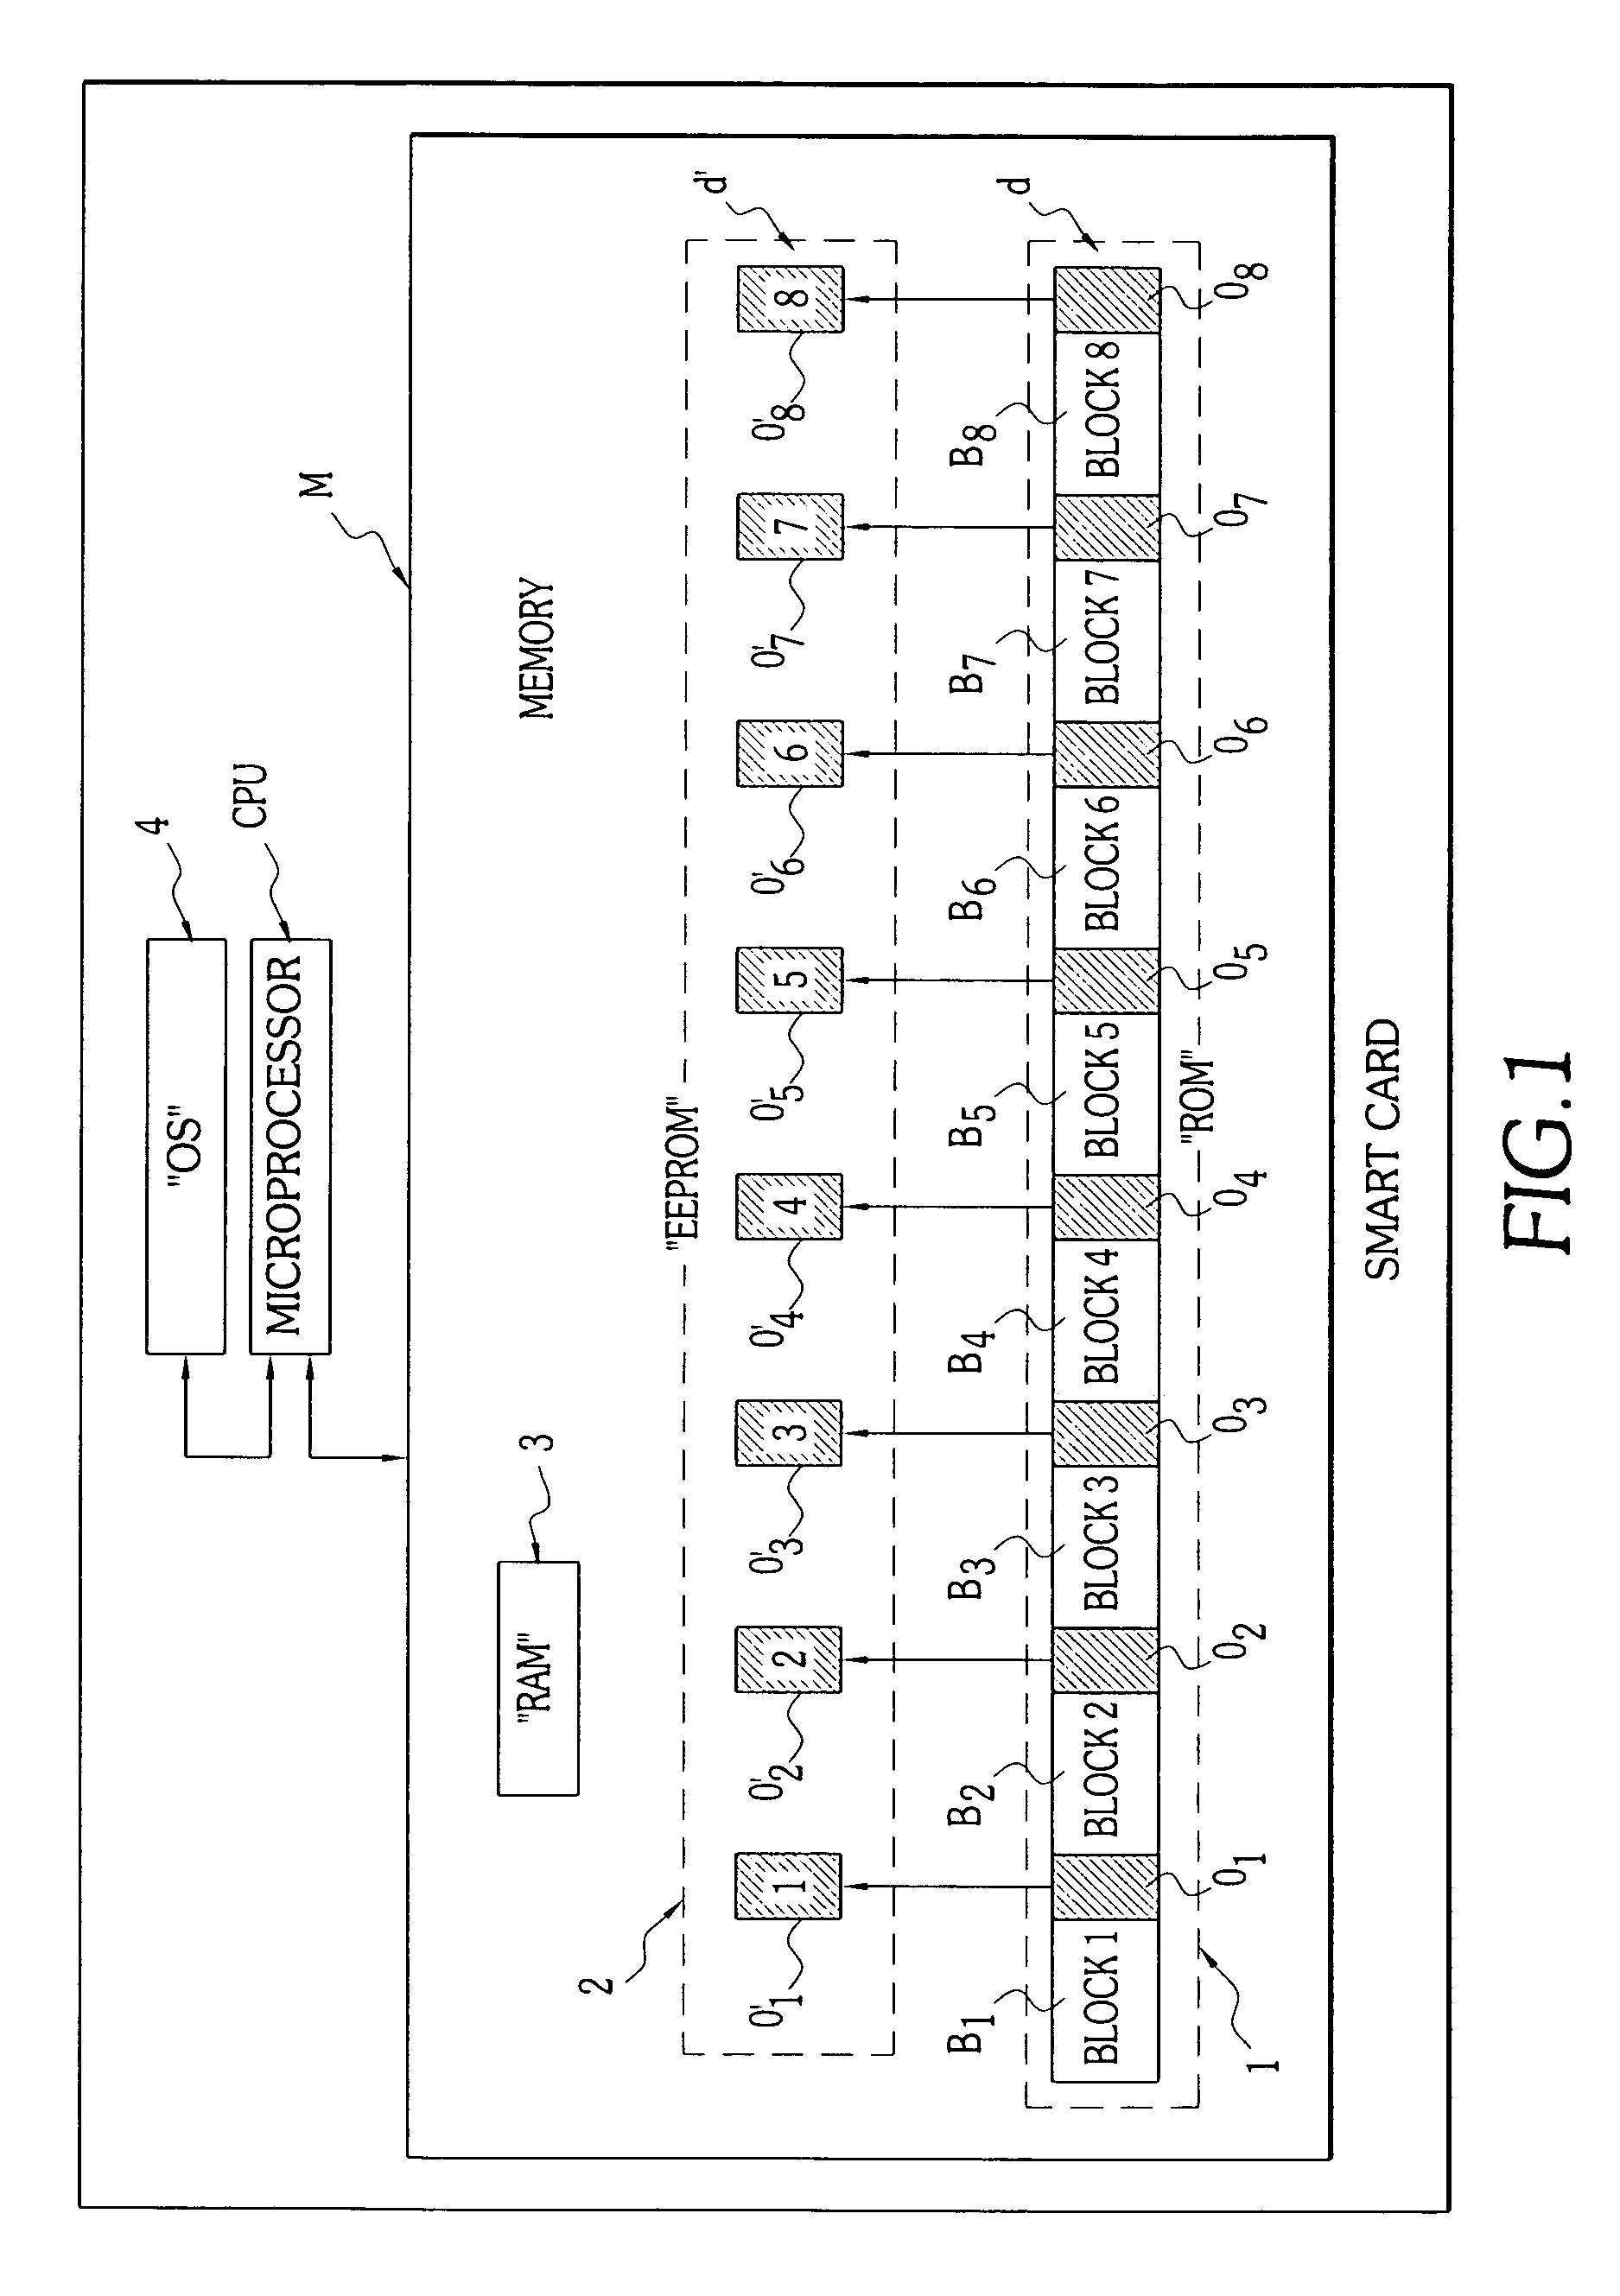 Method for secure storage of sensitive data in a memory of an embedded microchip system, particularly a smart card, and embedded system implementing the method